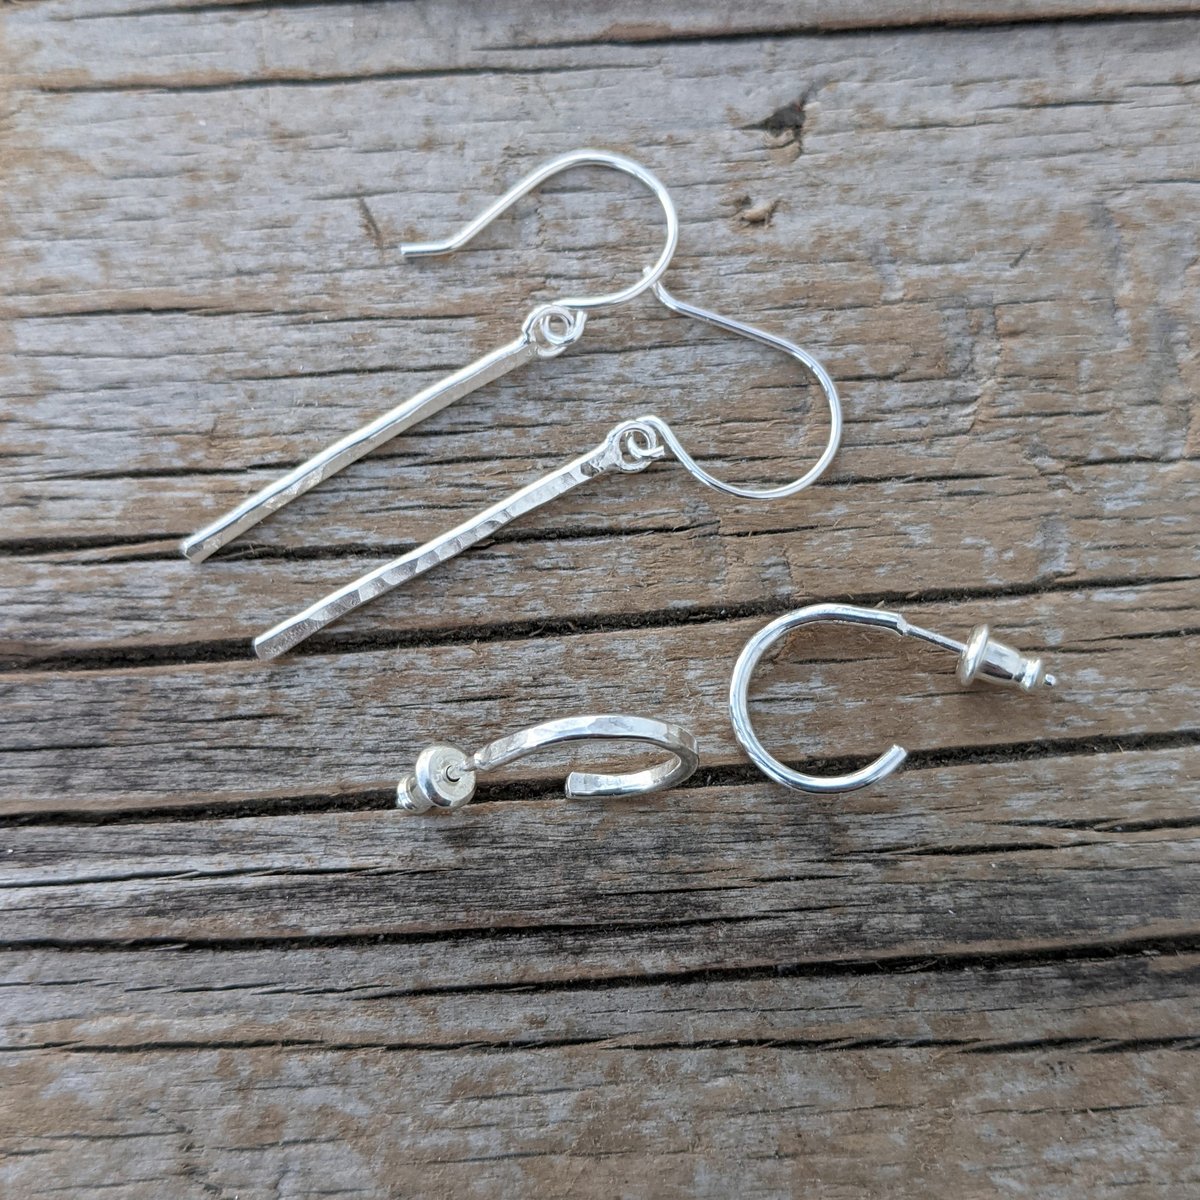 Image of Hammered sterling everyday earrings